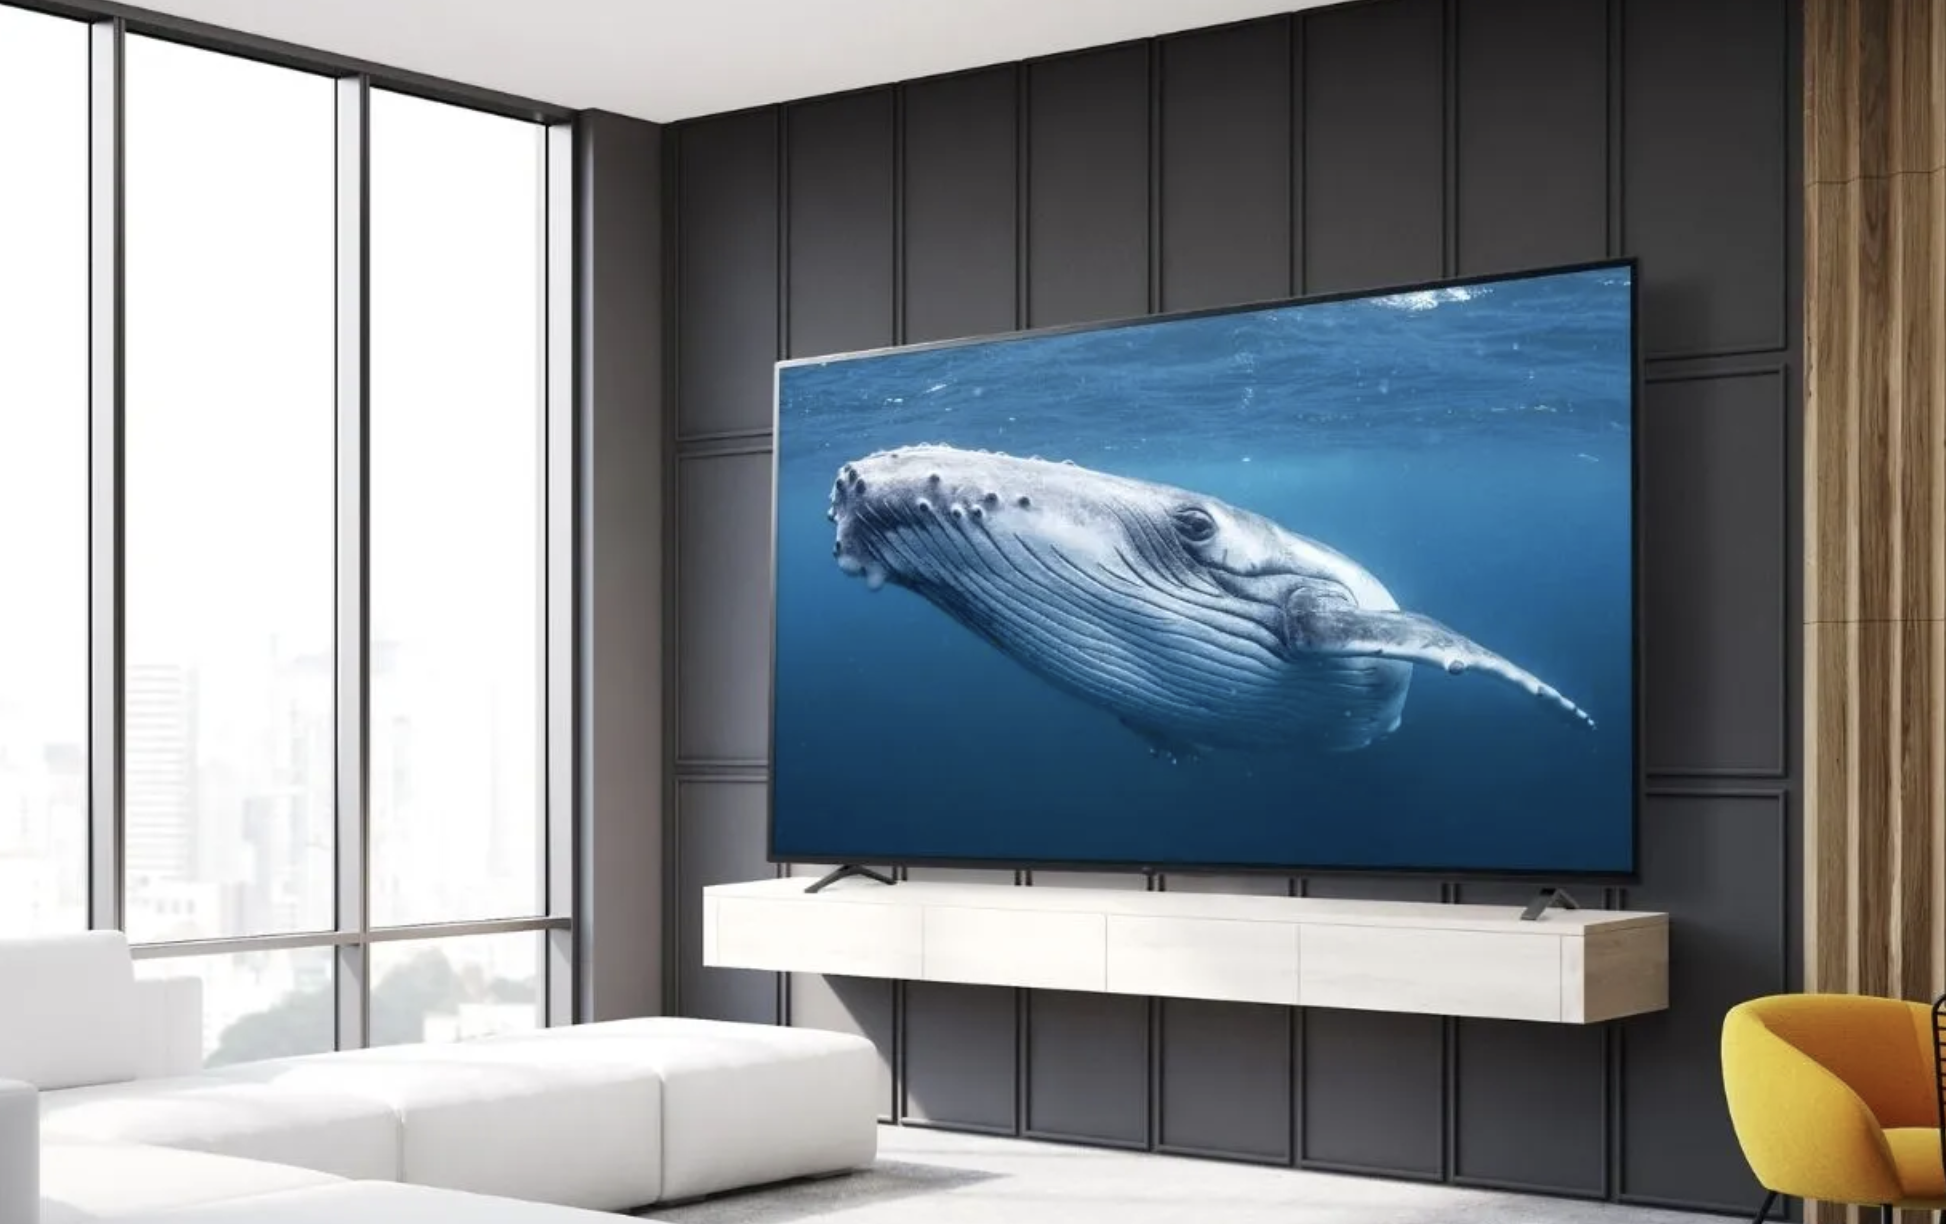 The 82-inch LG UP8770 4K TV in a living room.